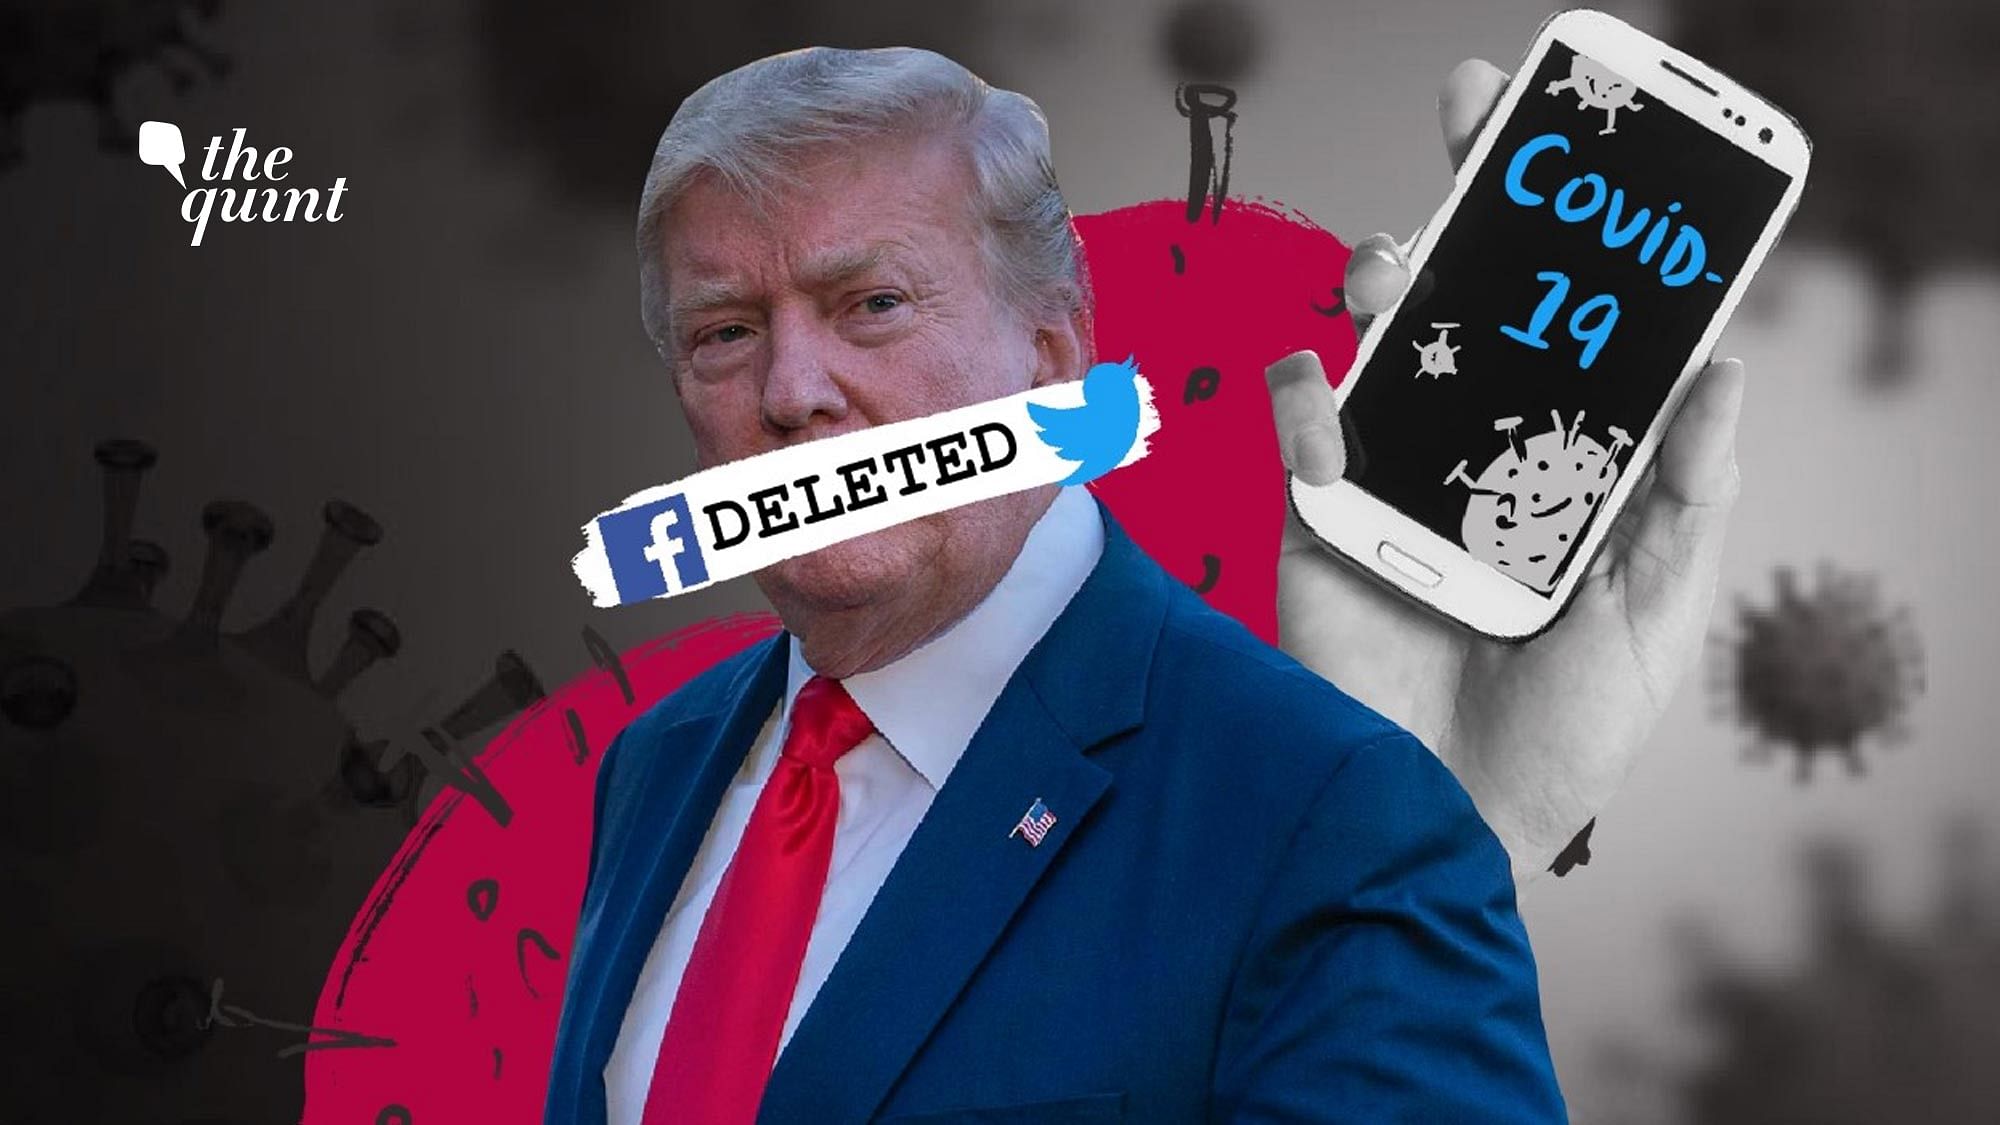 Trump’s plan comes after Twitter and Facebook decided to “deplatform” him in response to the 6 January Capitol riot. Twitter’s Trump ban is permanent.&nbsp;